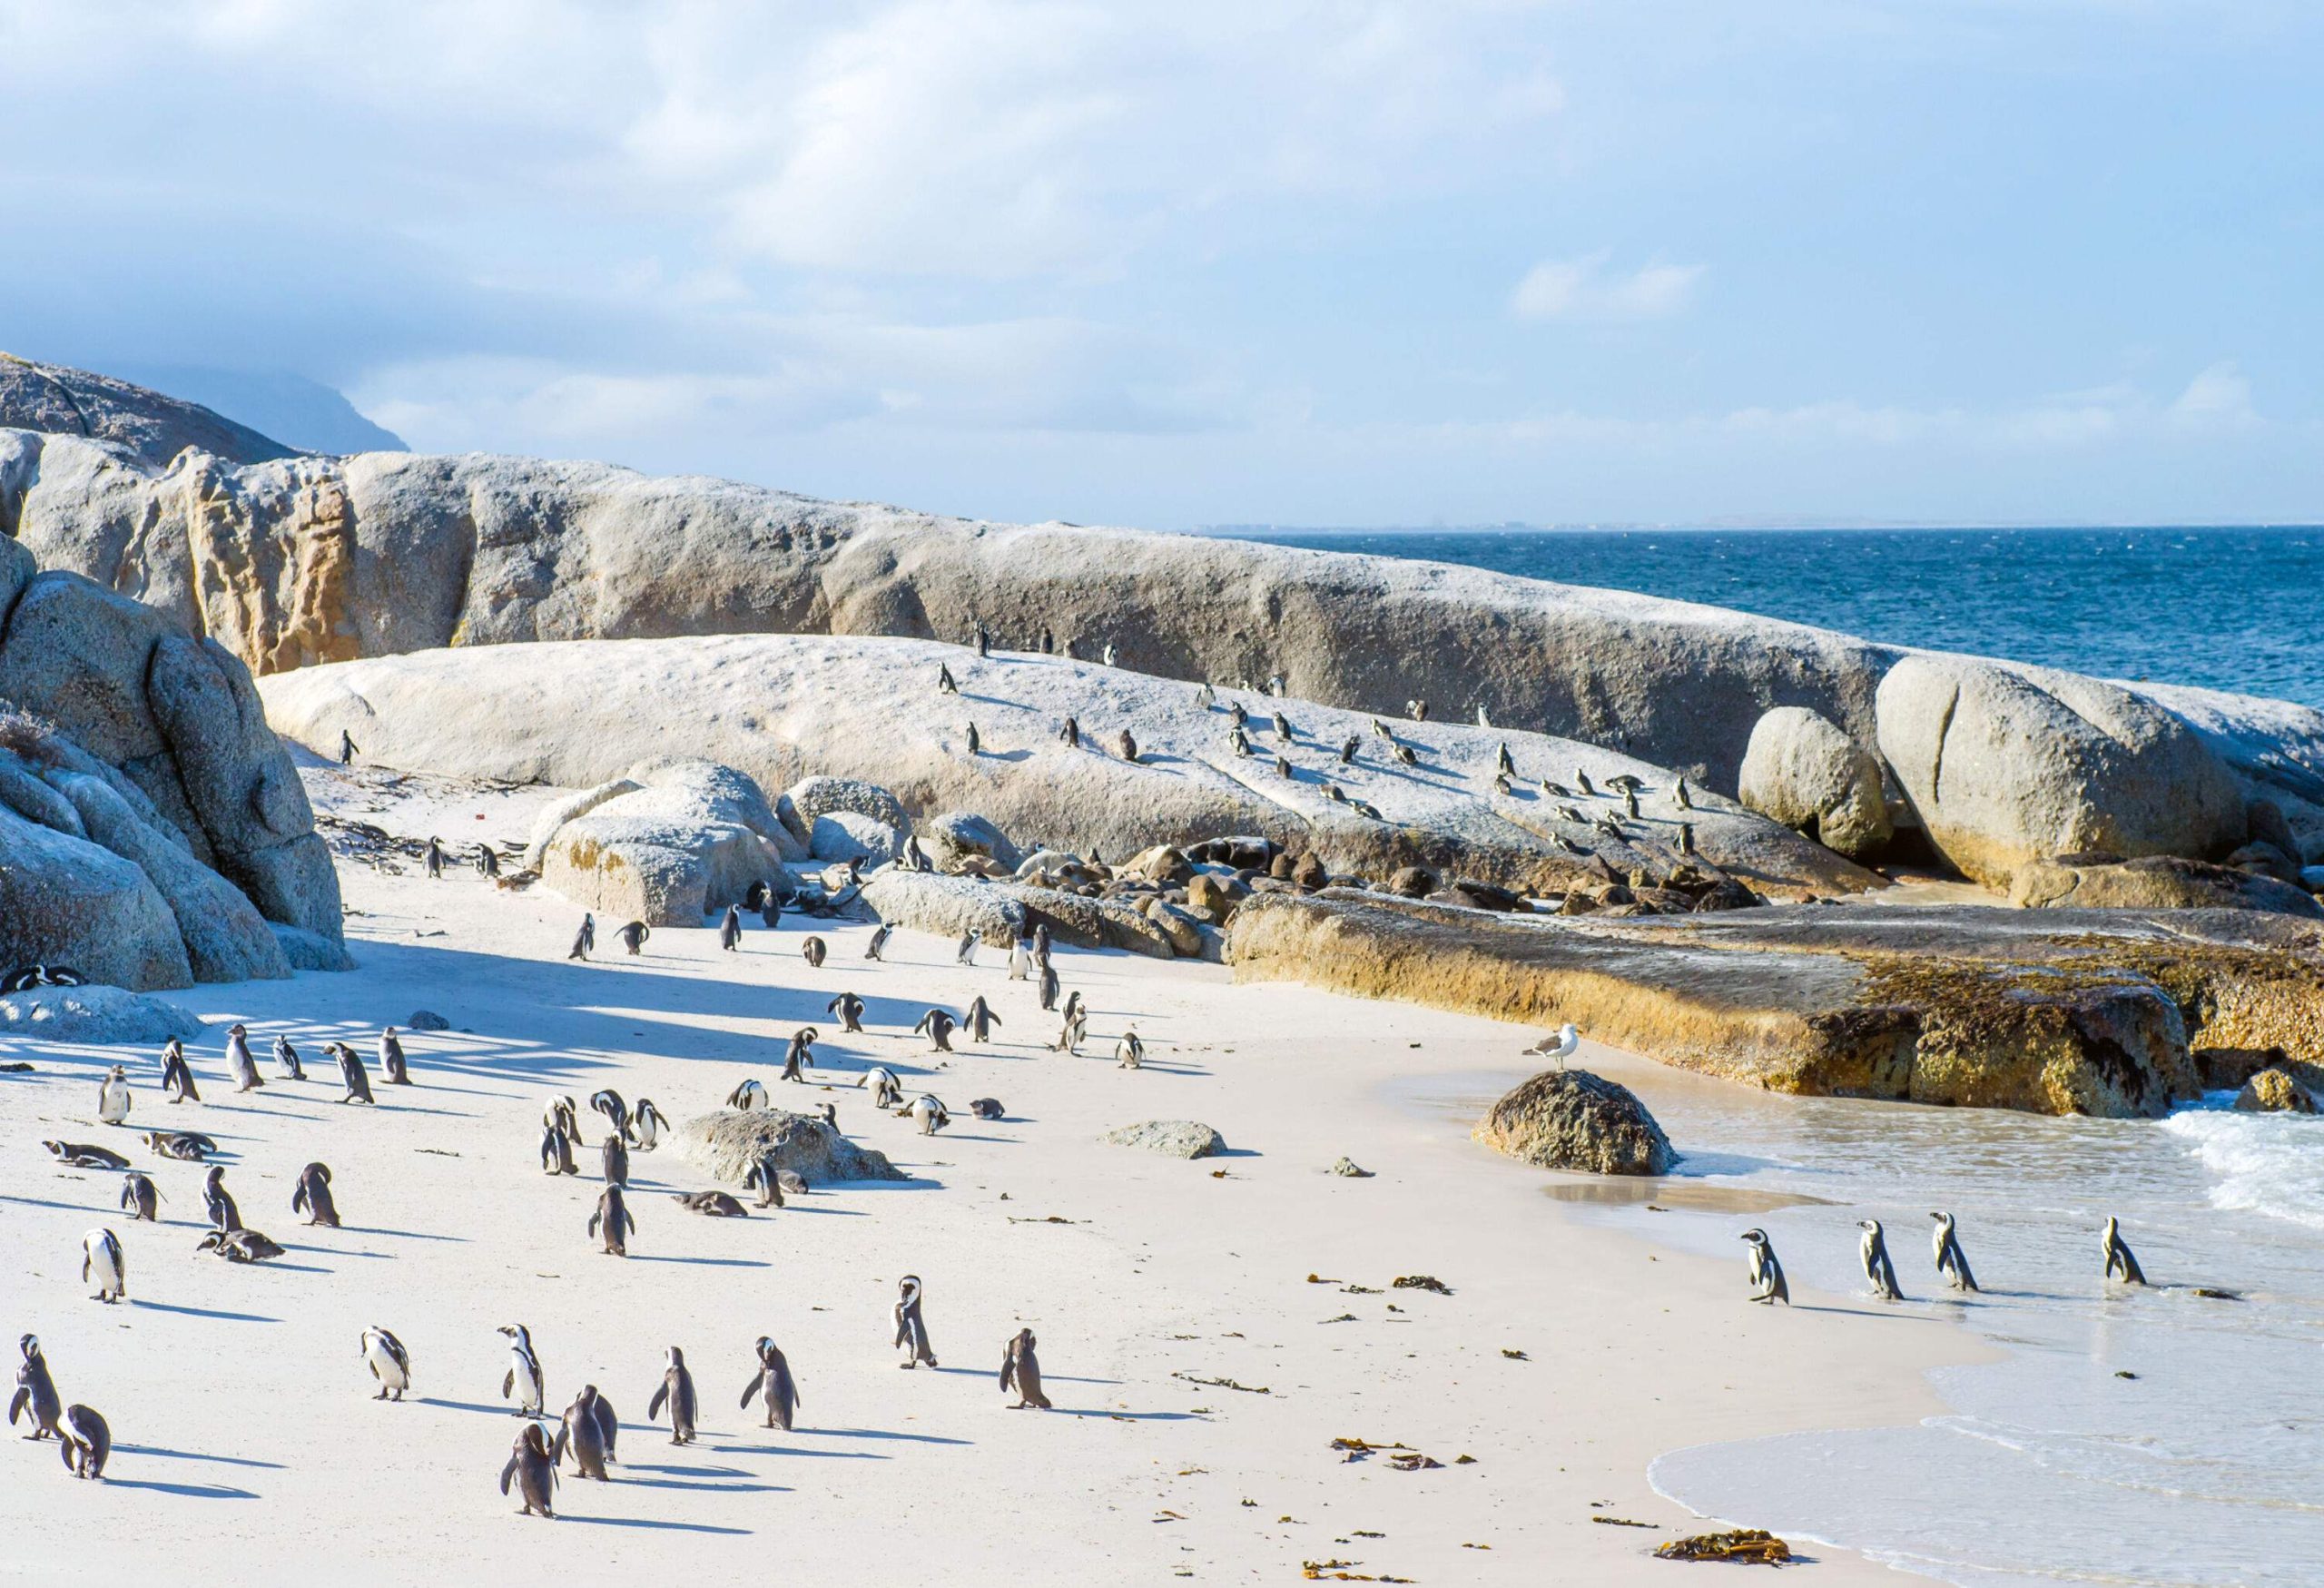 Penguins scurrying across the white sand and boulders across the beach.